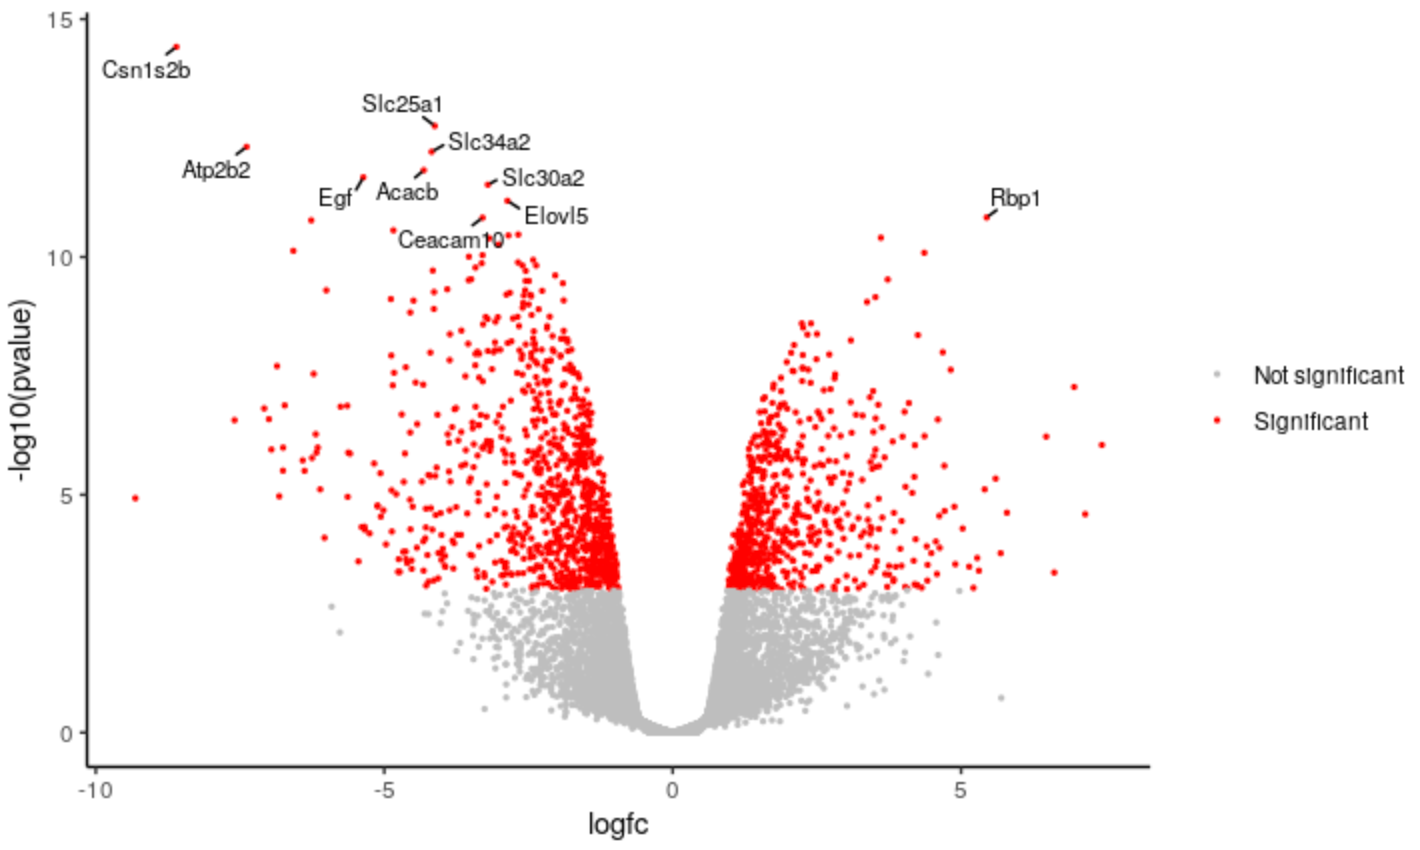 Screenshot of Volcano Plot customised in R. Significant genes had their colour changed to red, and points and labels were made smaller.